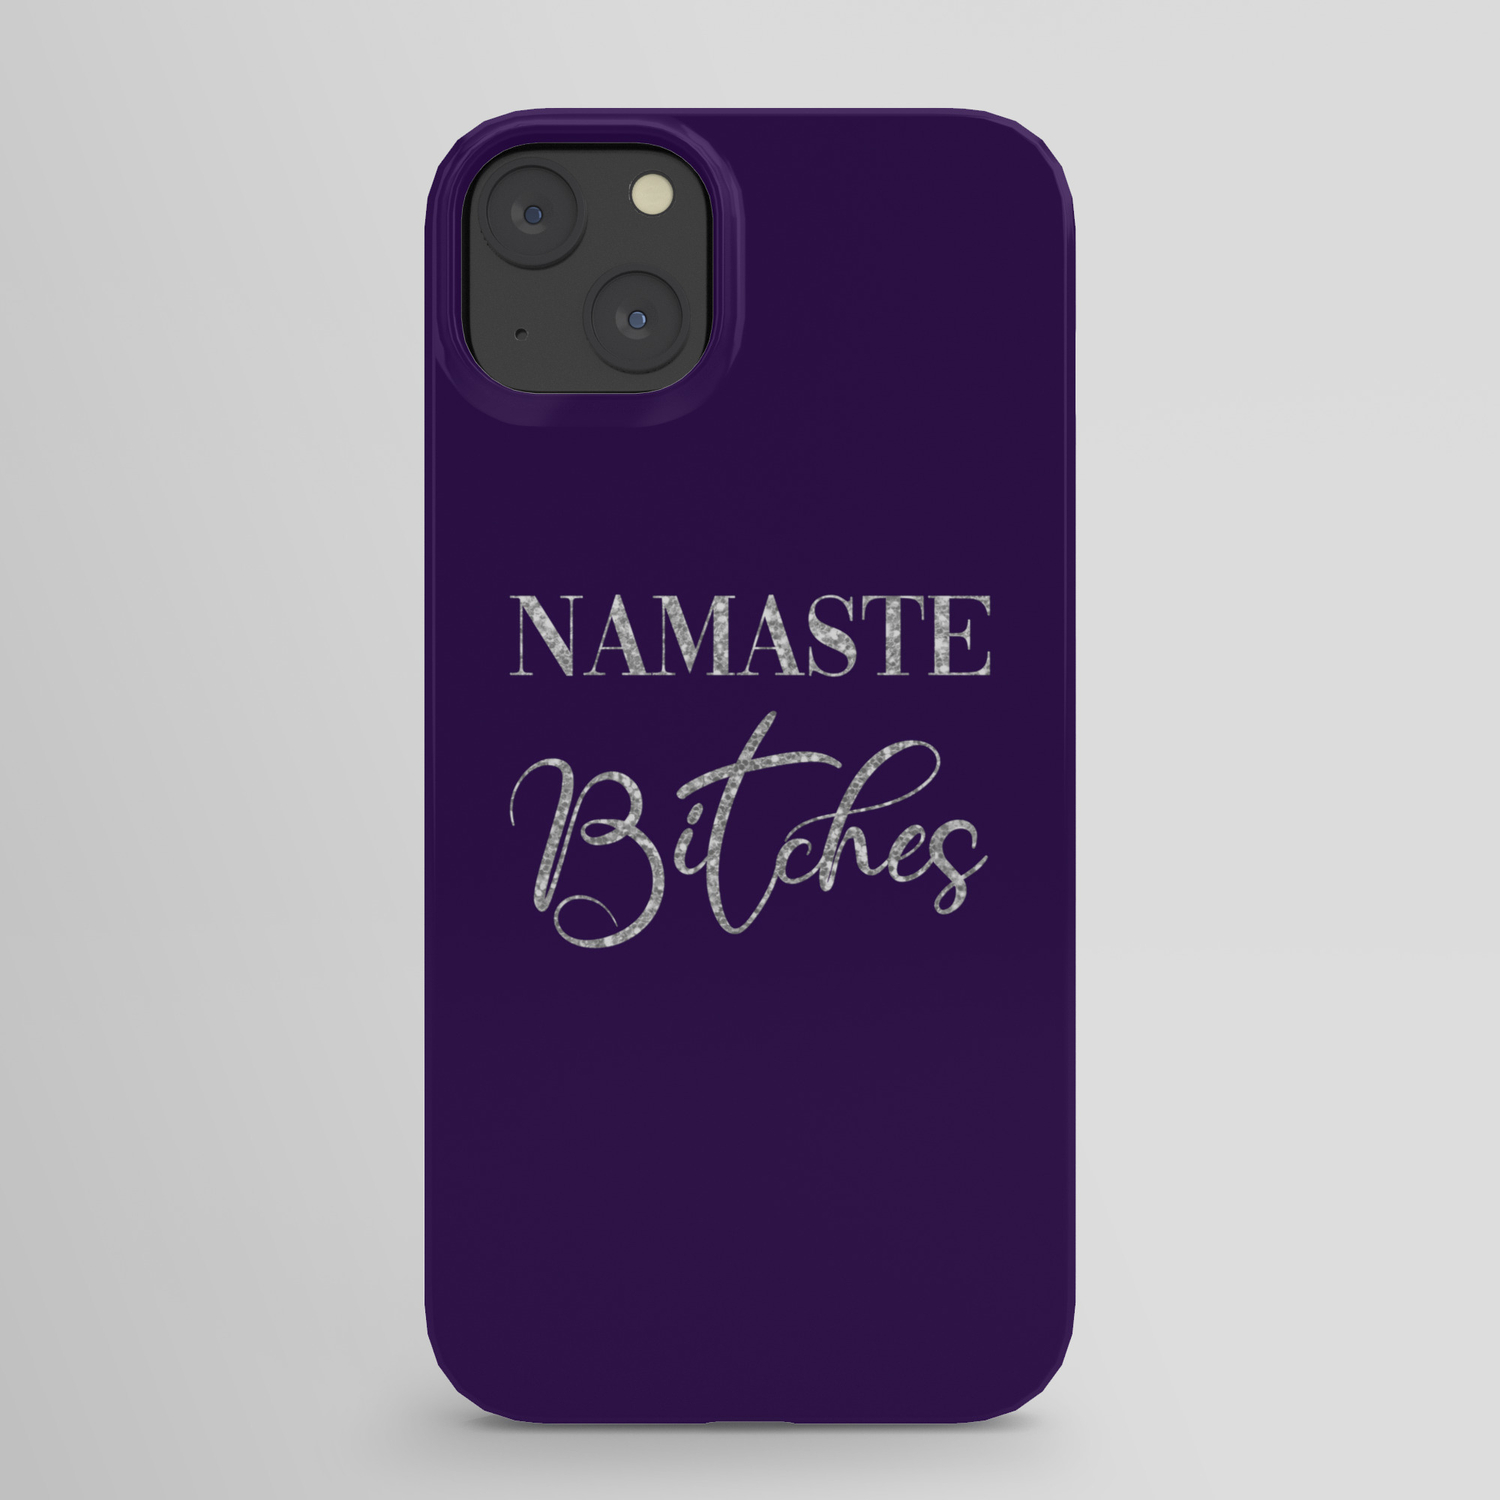 Namaste Bitches, Funny Quotes iPhone Case by Quote Girl | Society6